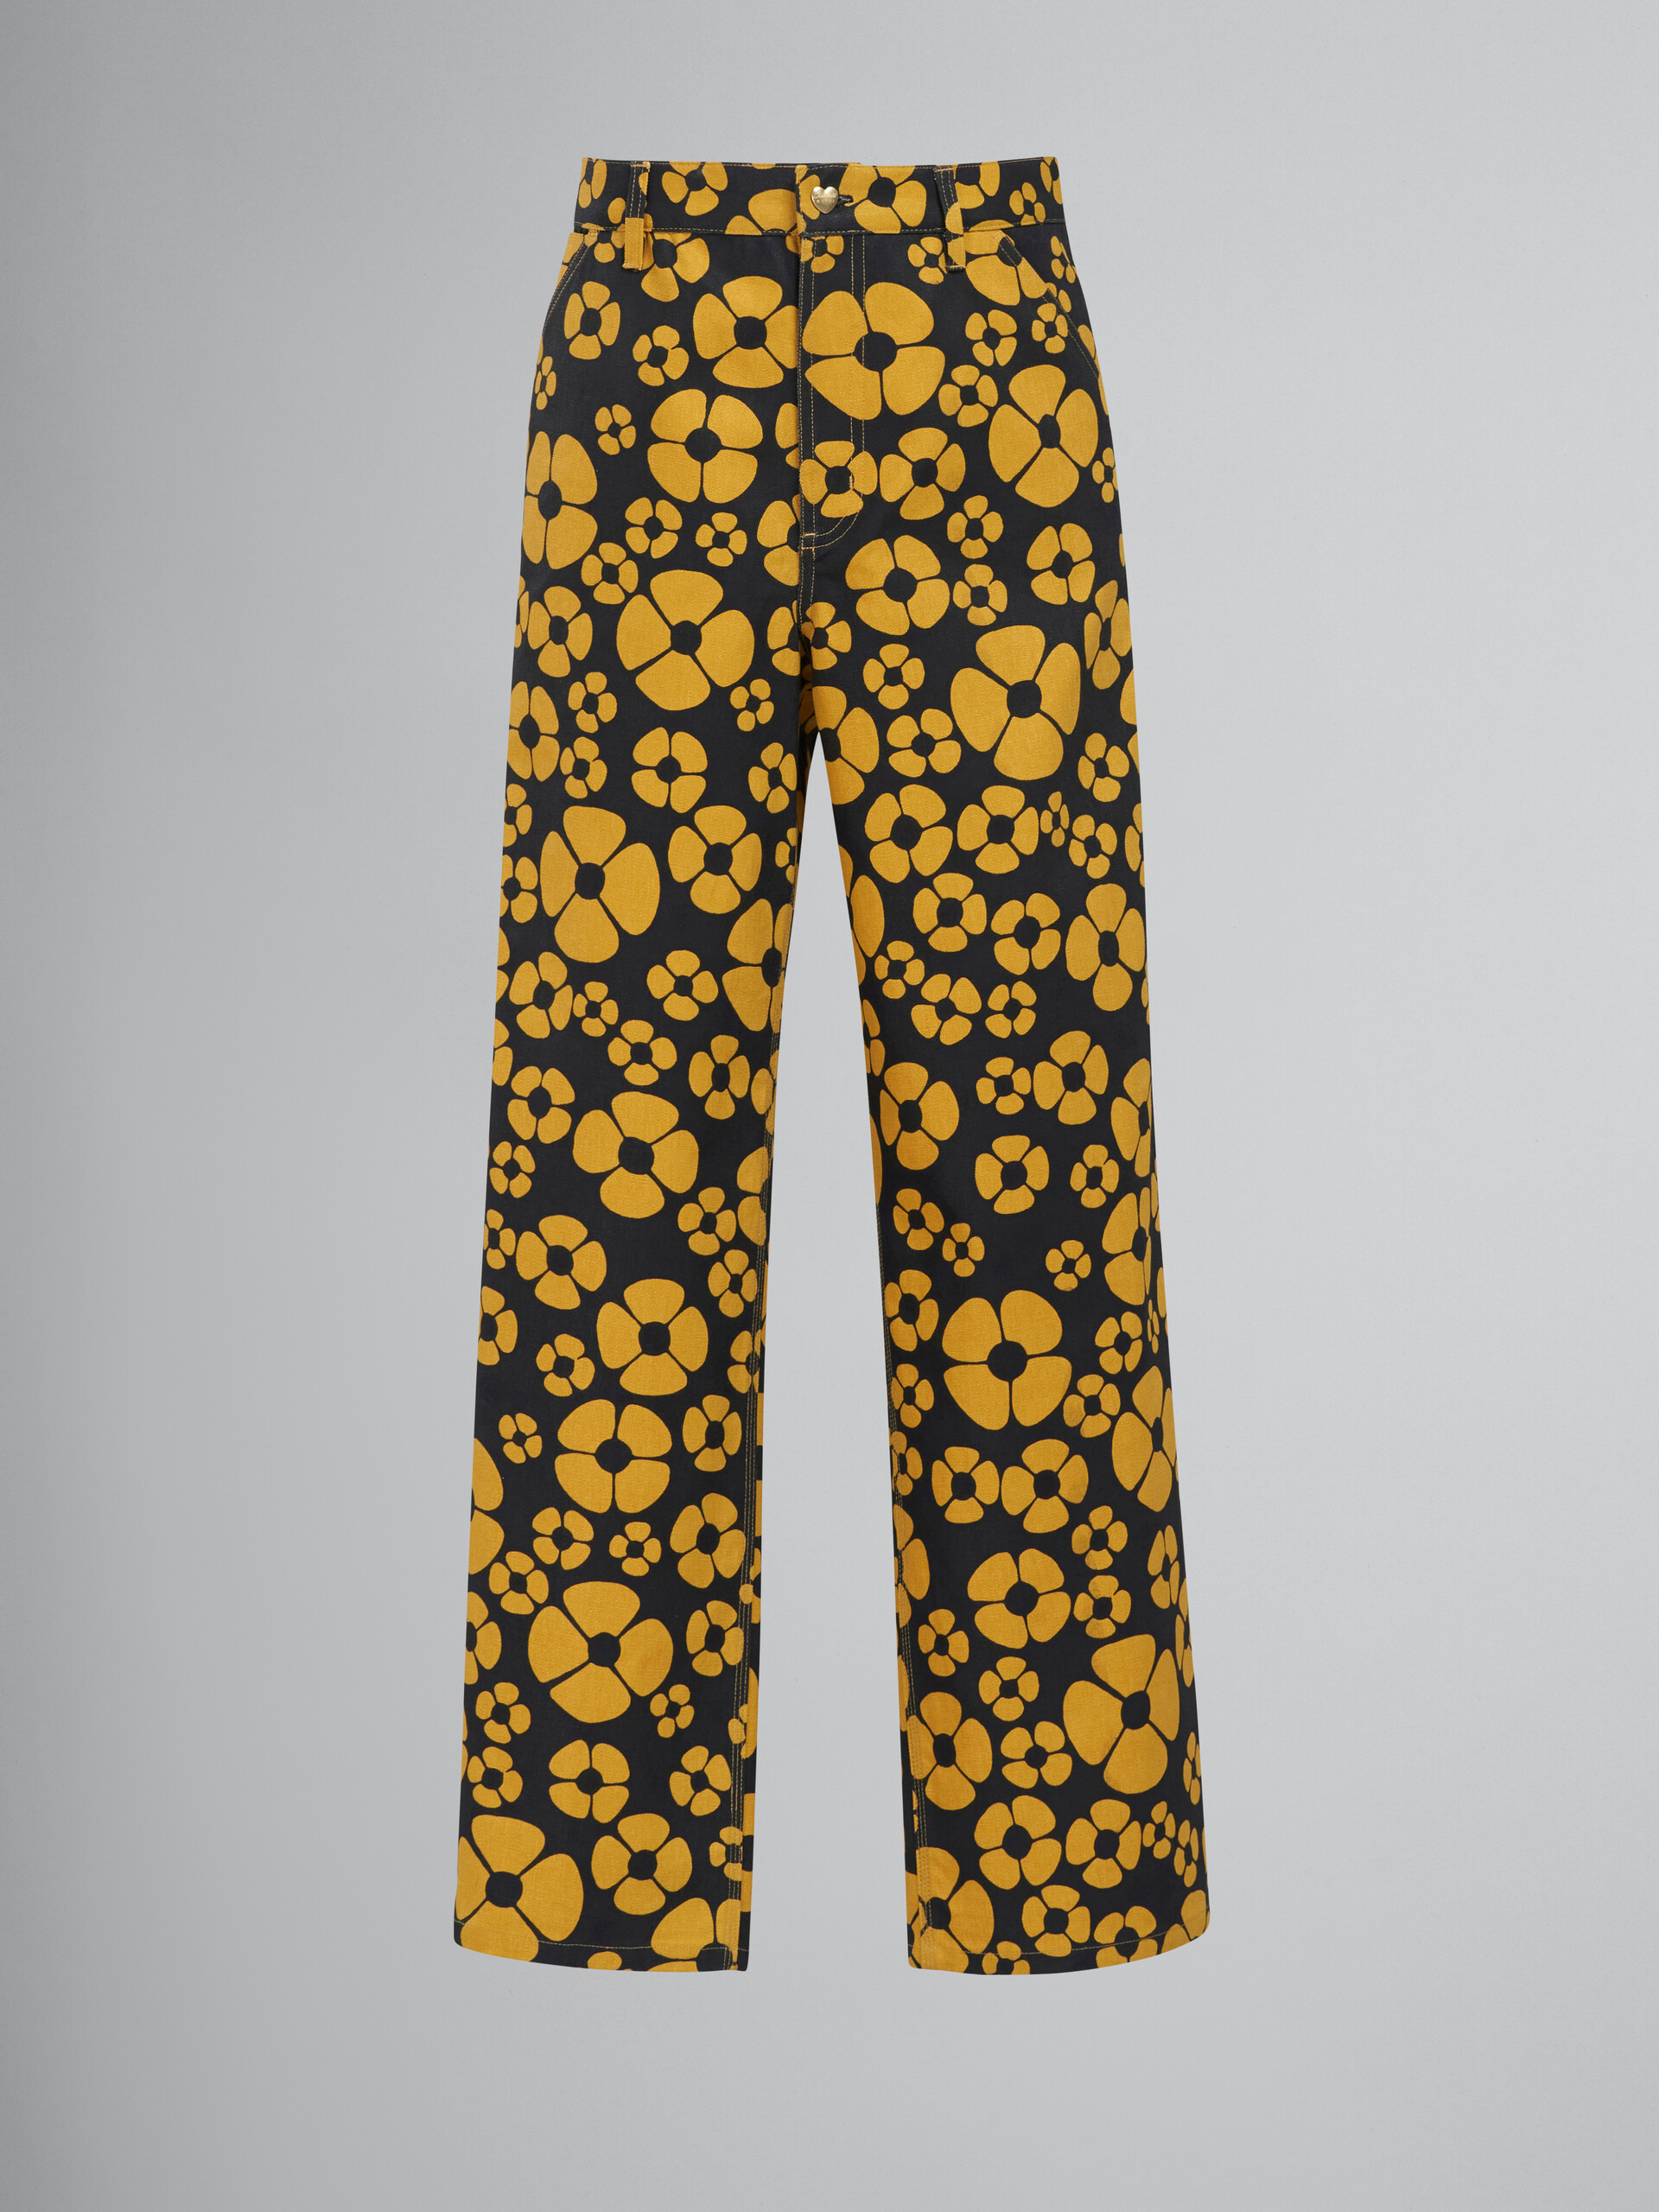 MARNI x CARHARTT WIP - yellow floral trousers - Pants - Image 1